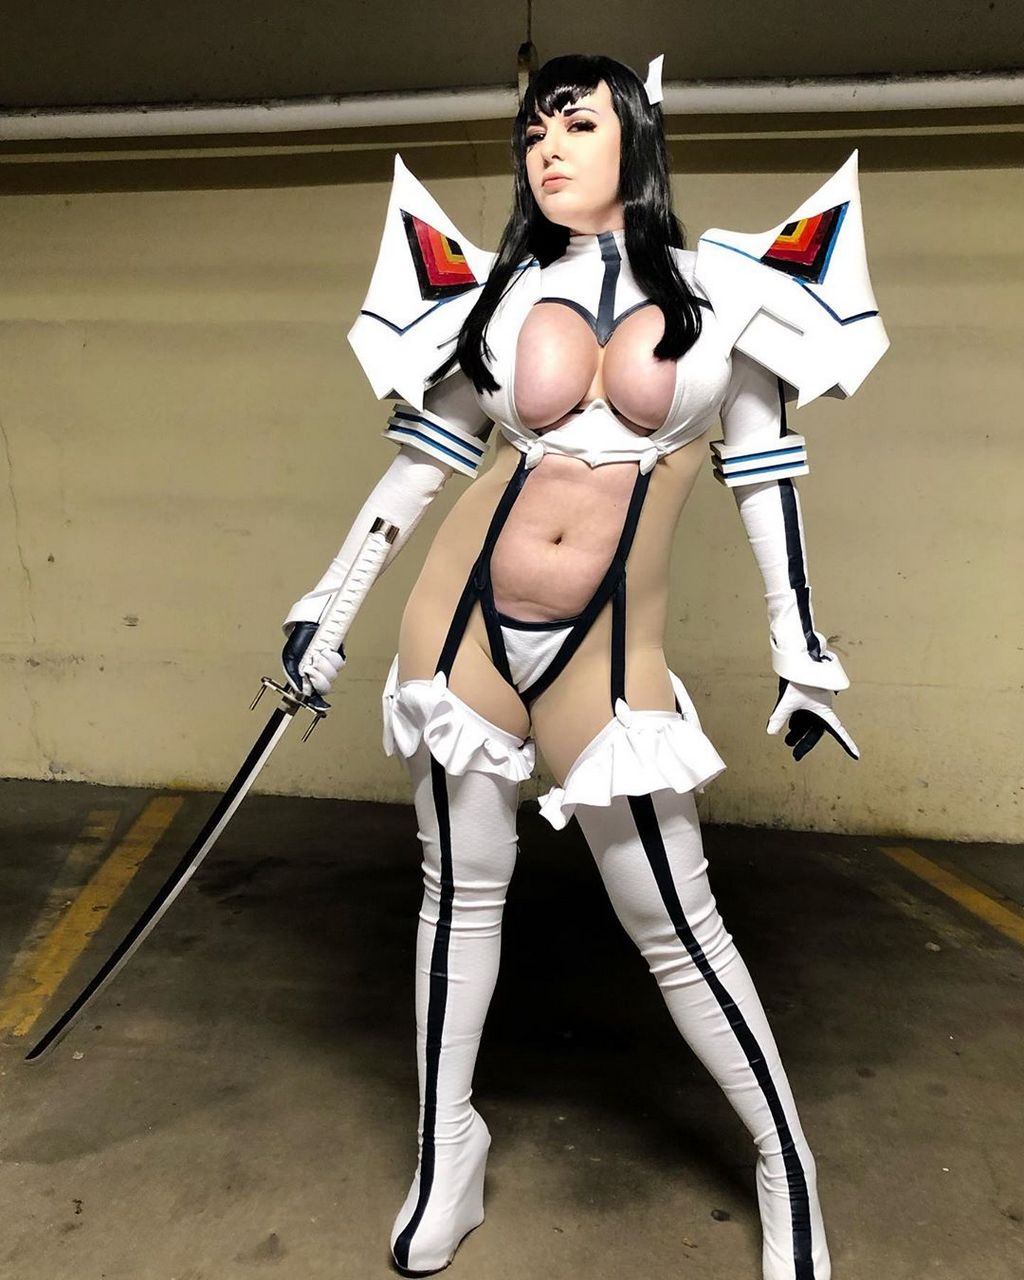 Lisa Lou Who As Satsuki Kiryuin From Kill La Kill Original Ig Link In Comments Check Her Ou